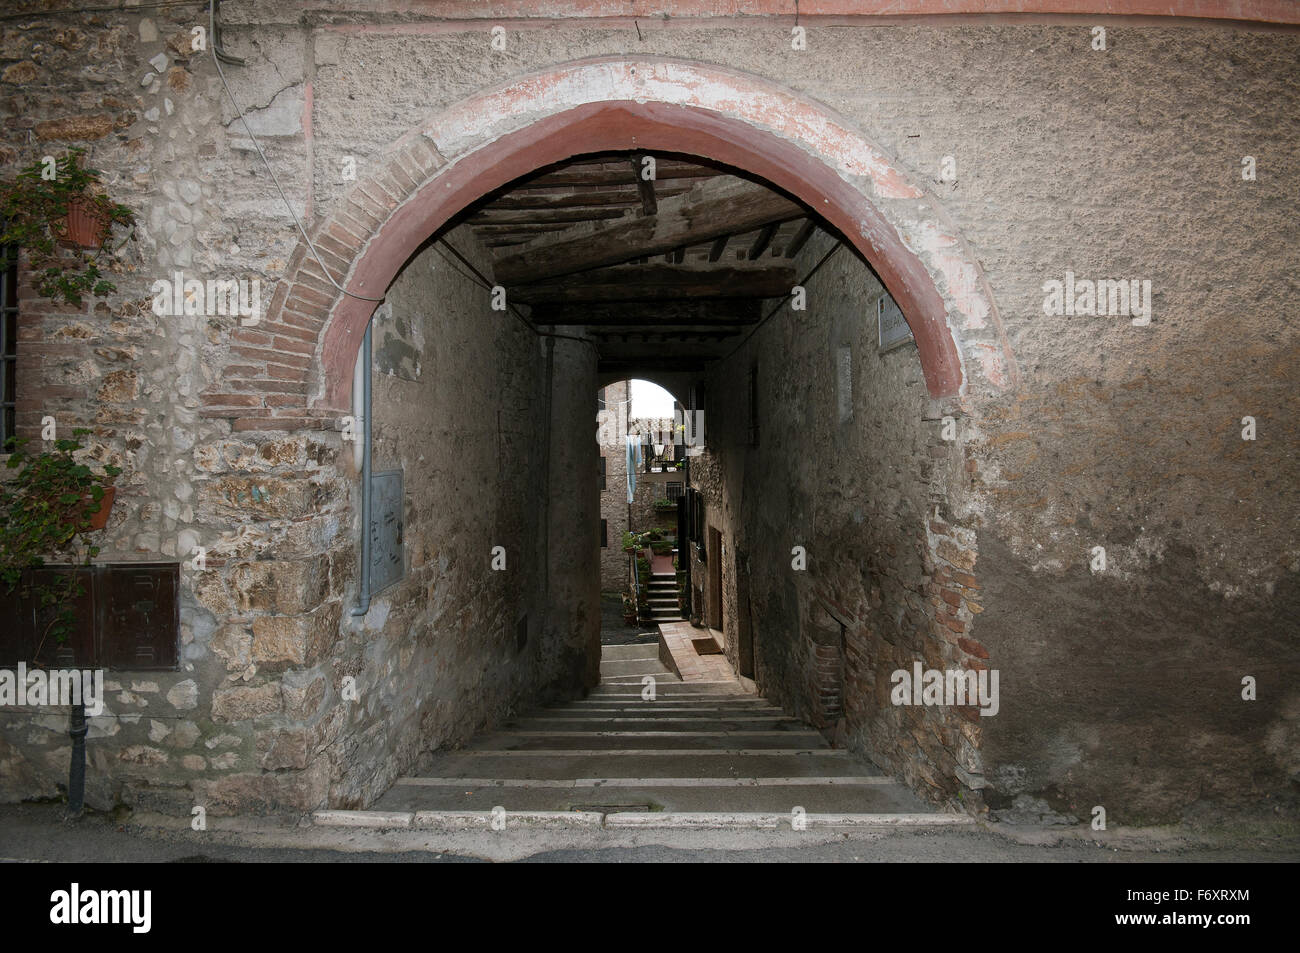 Arch and alley with stairway in the village of Montecchio, Terni, Umbria, Italy Stock Photo